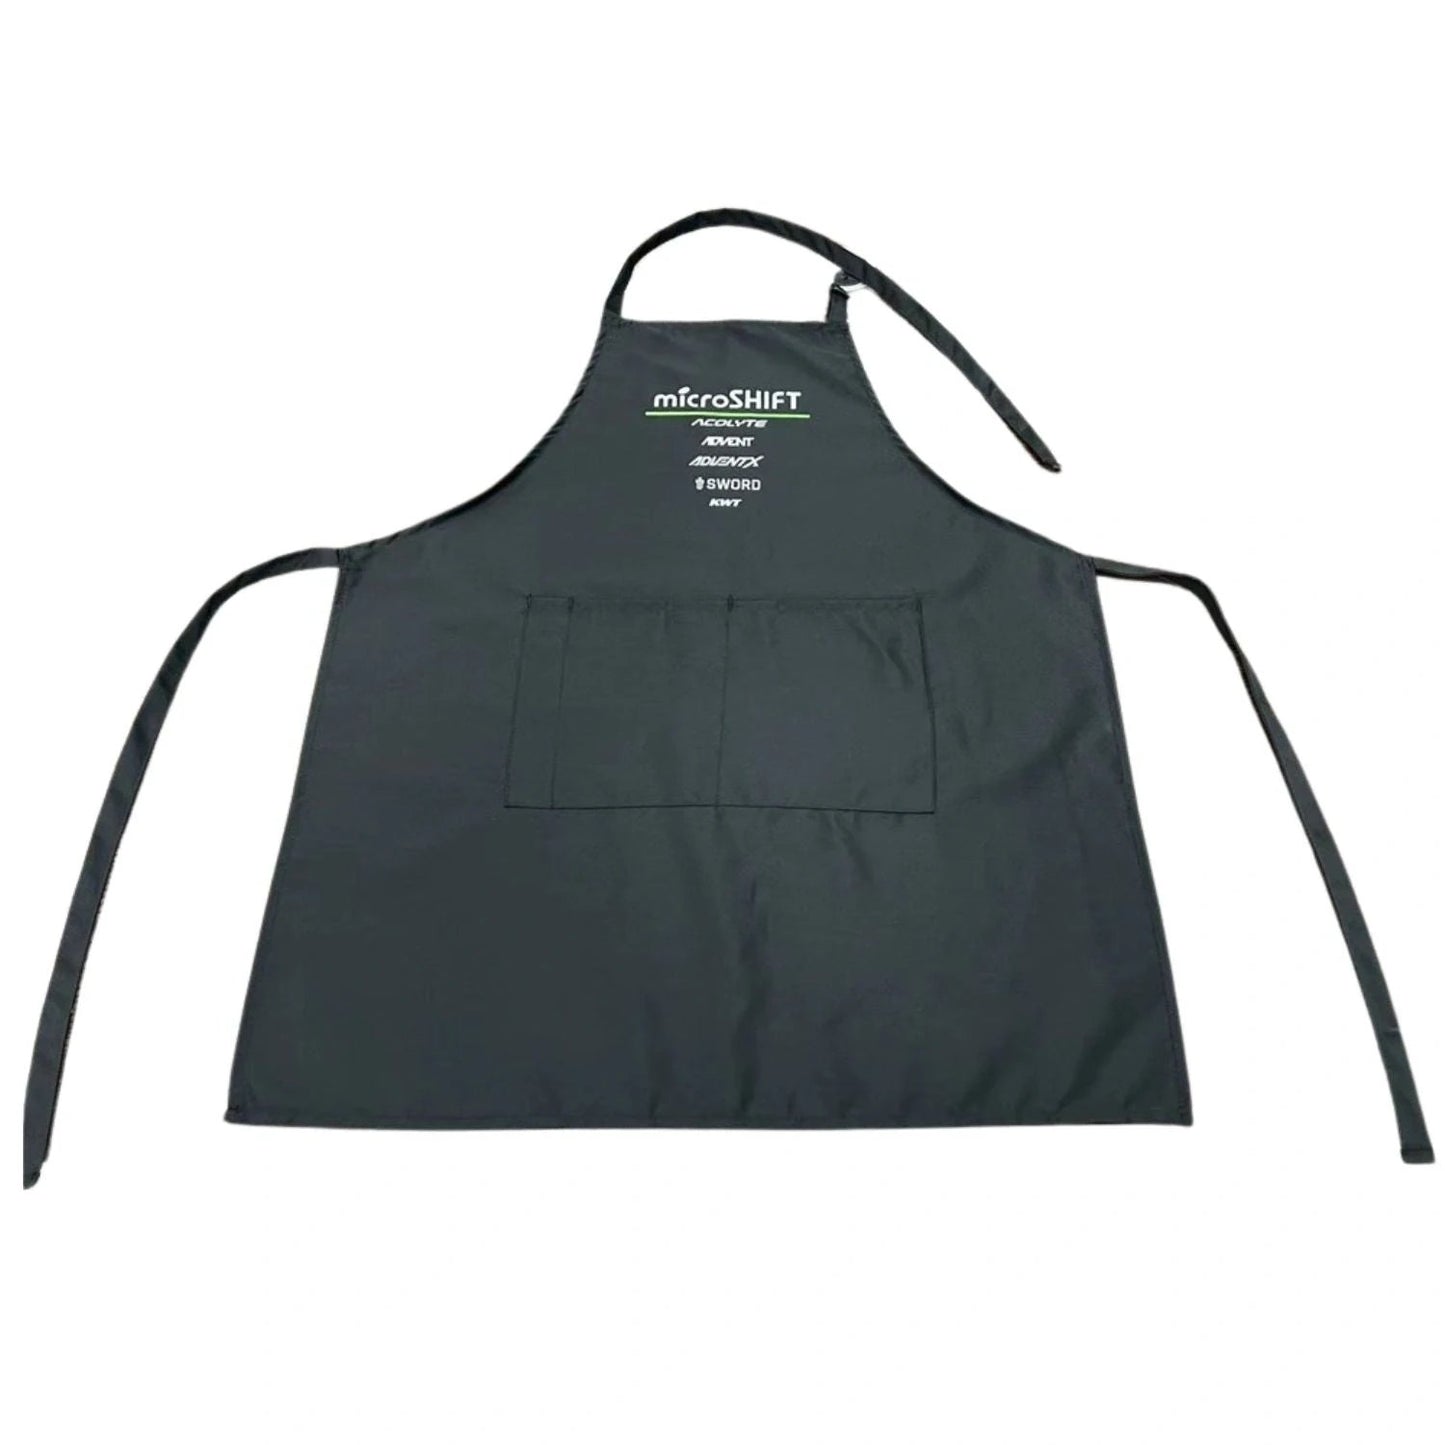 Microshift Apron Cleaning Kit - Stain Resistant, Durable Fabric